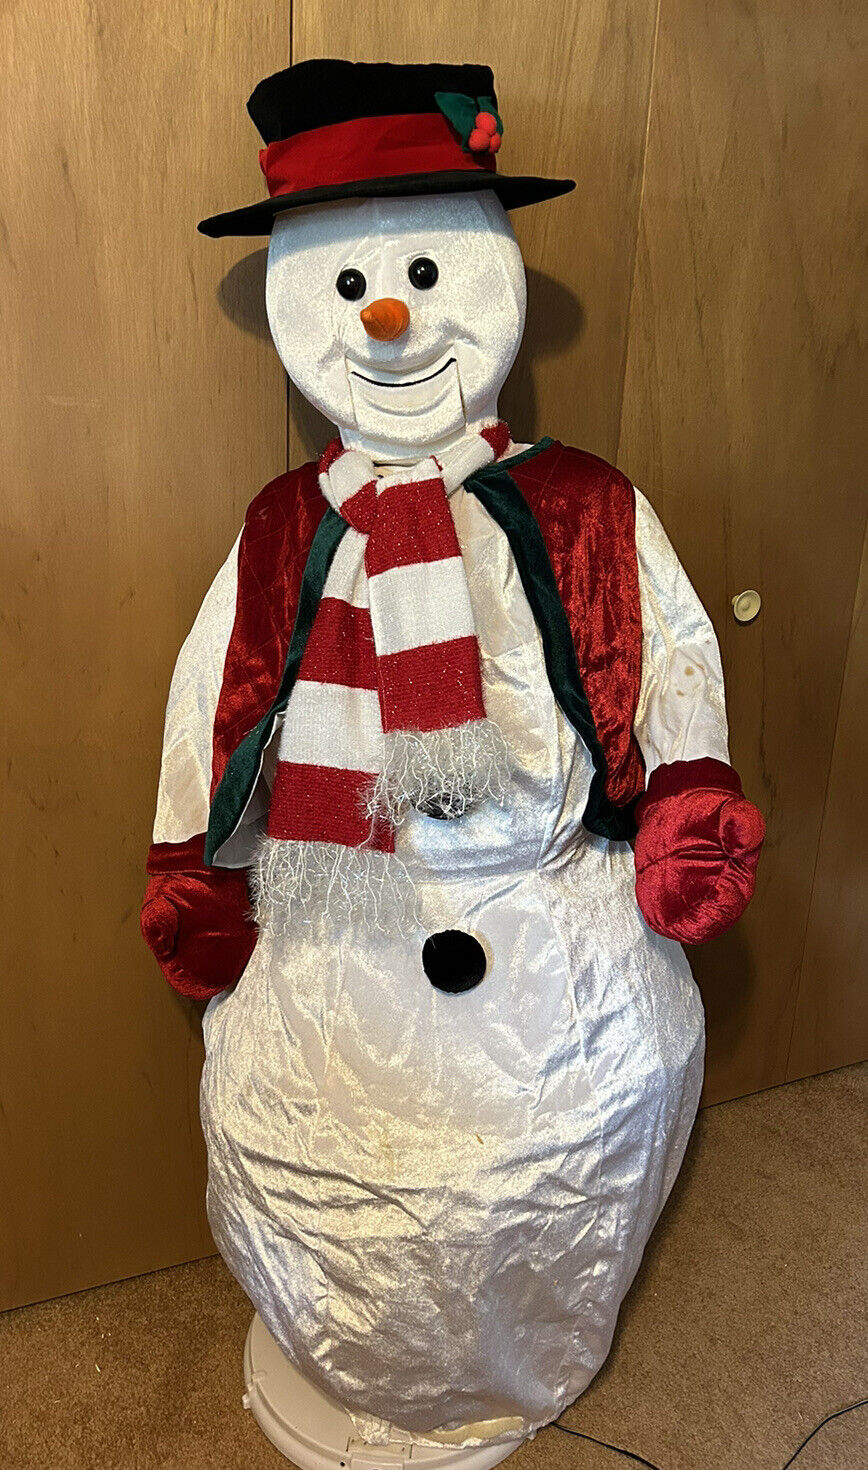 GEMMY HOLIDAY Animated Snowman 5' ft Tall Singing/ Dancing/ Karaoke